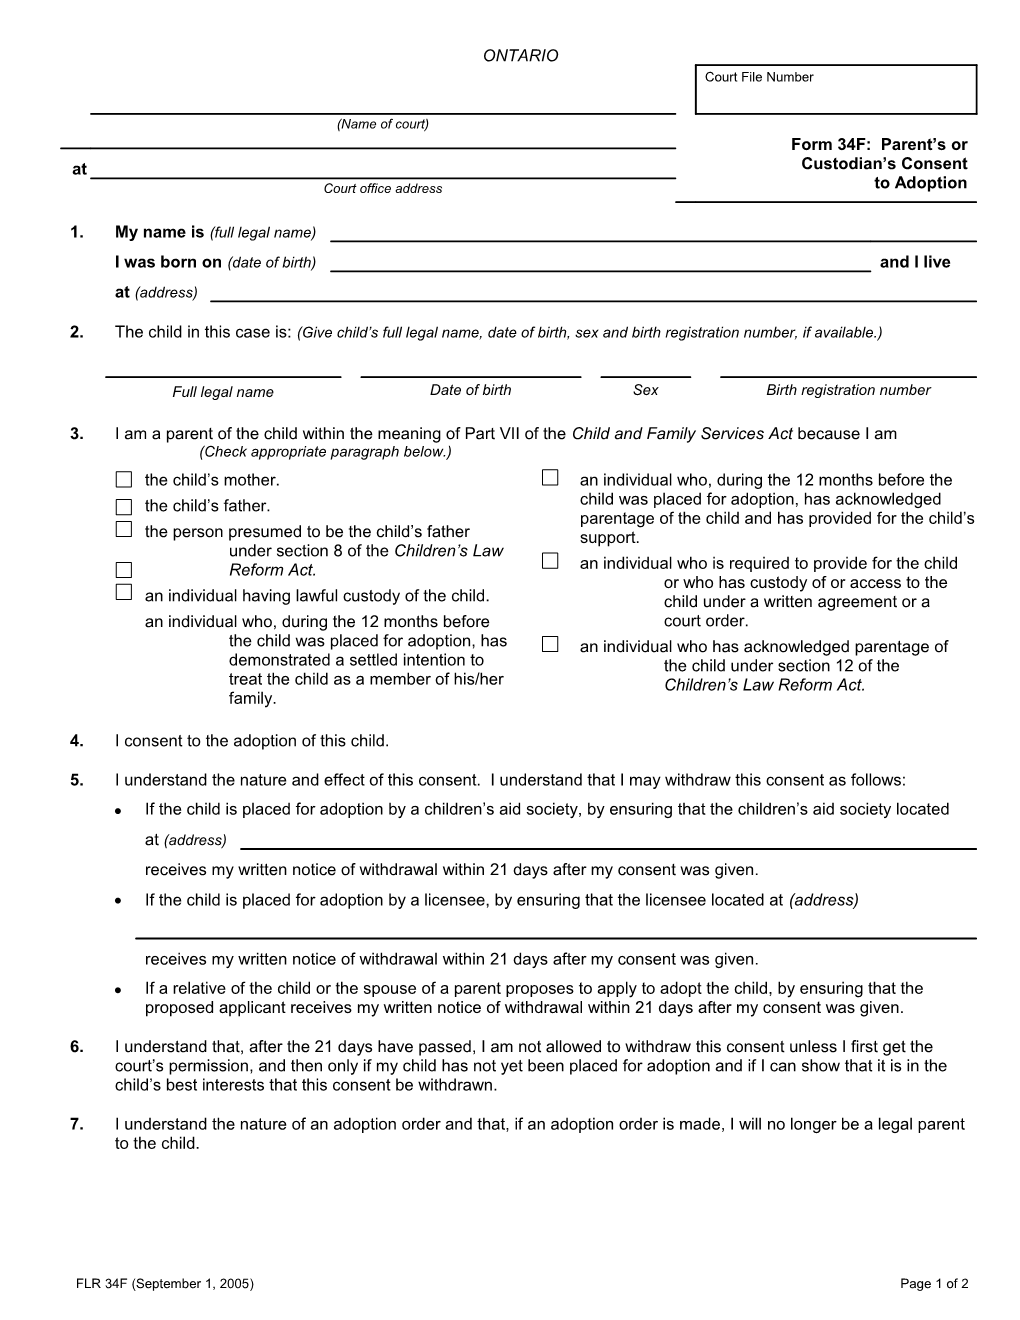 Form 34F Parent S Or Custodian S Consent to Adoption